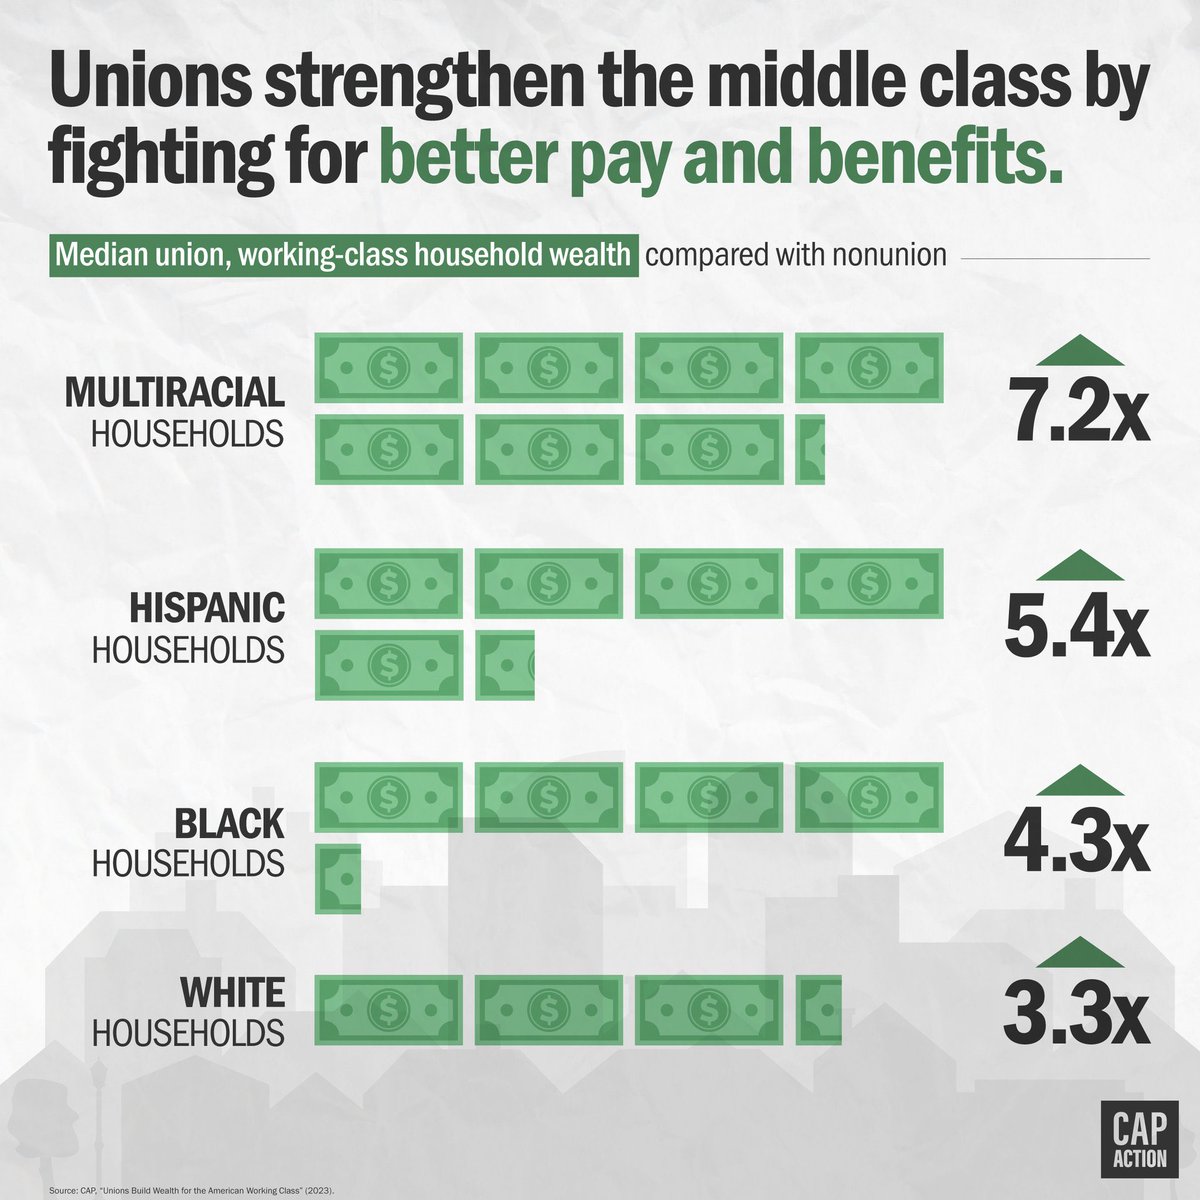 To quote @POTUS, “the middle class built America, and UNIONS built the middle class.”
#UnionsForAll